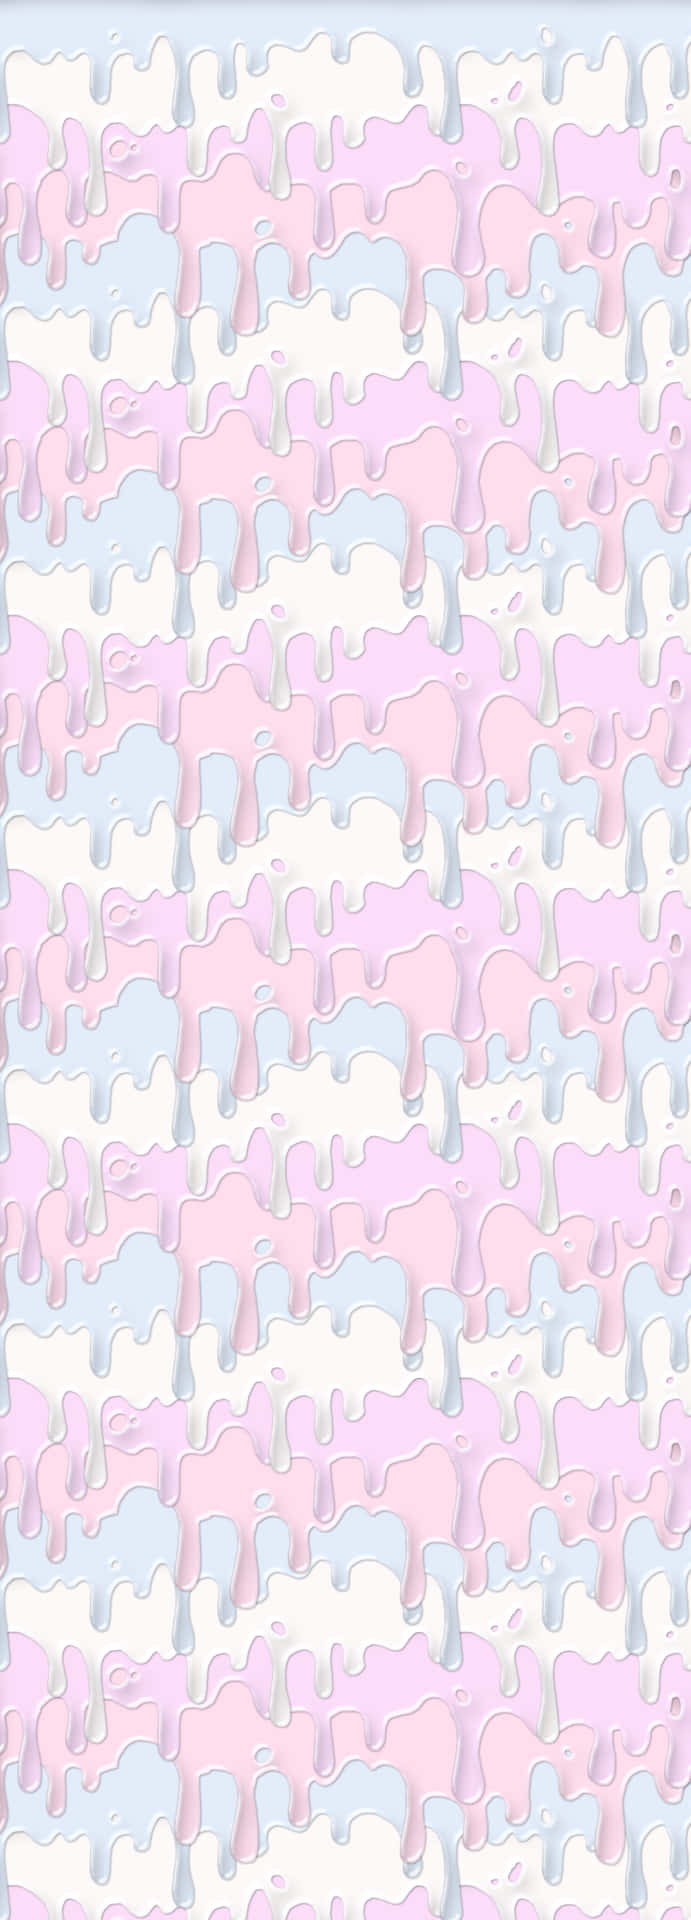 Gothic Pastel Droplets Wallpaper